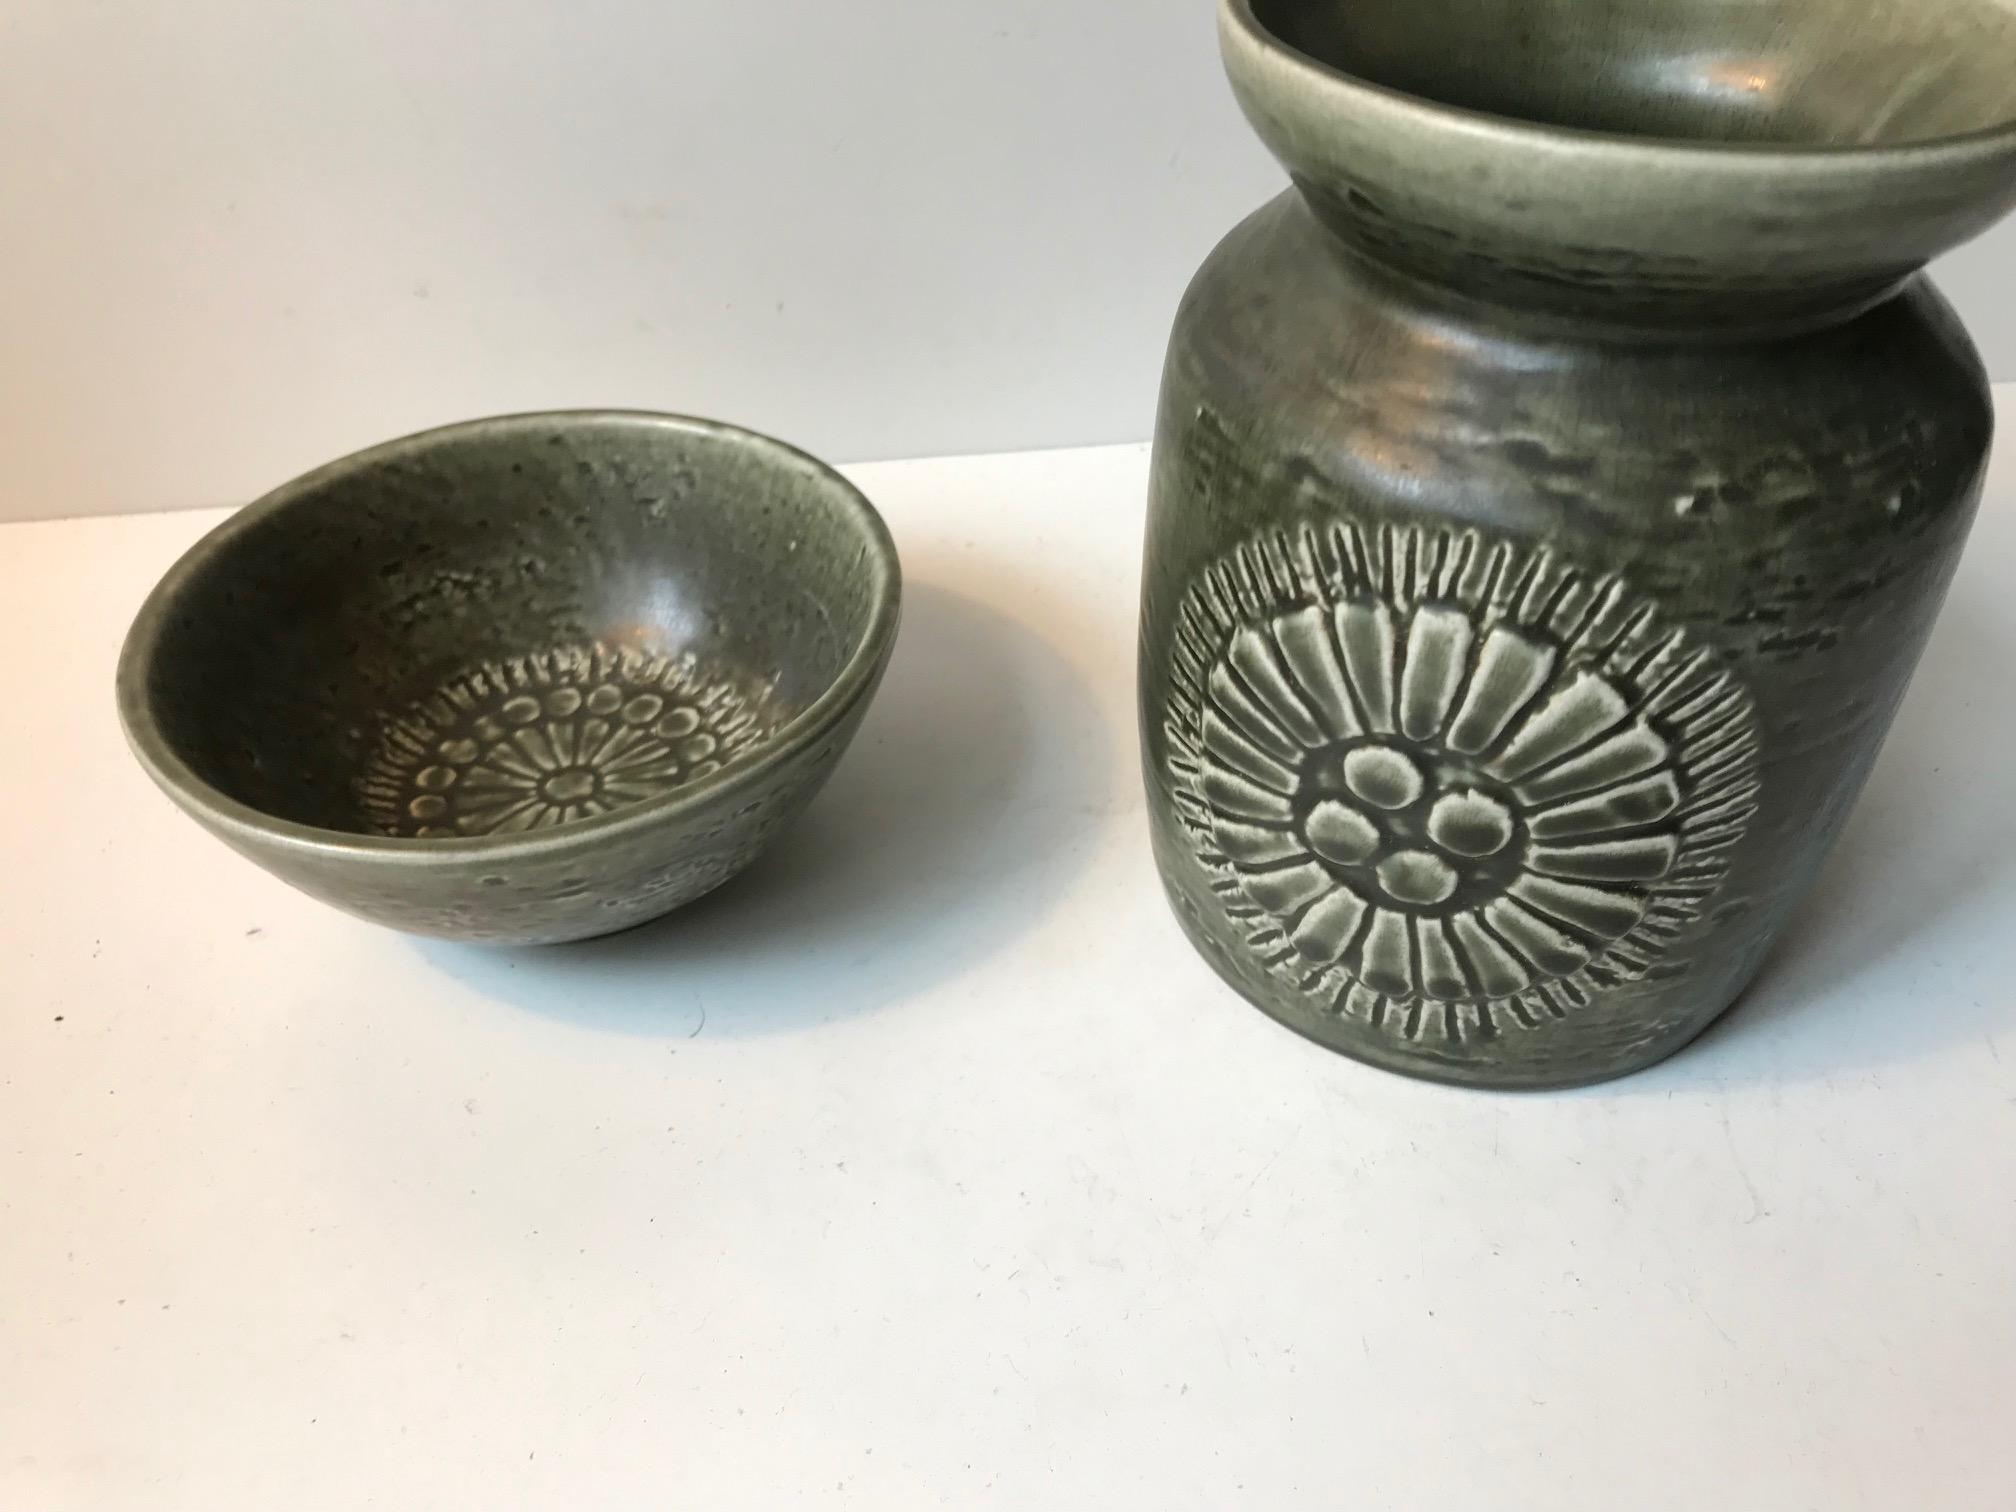 Scandinavian Modern Olive Green Ceramic Vase and Bowl 'Zenit' by Gunnar Nylund for Rorstrand, 1970s For Sale